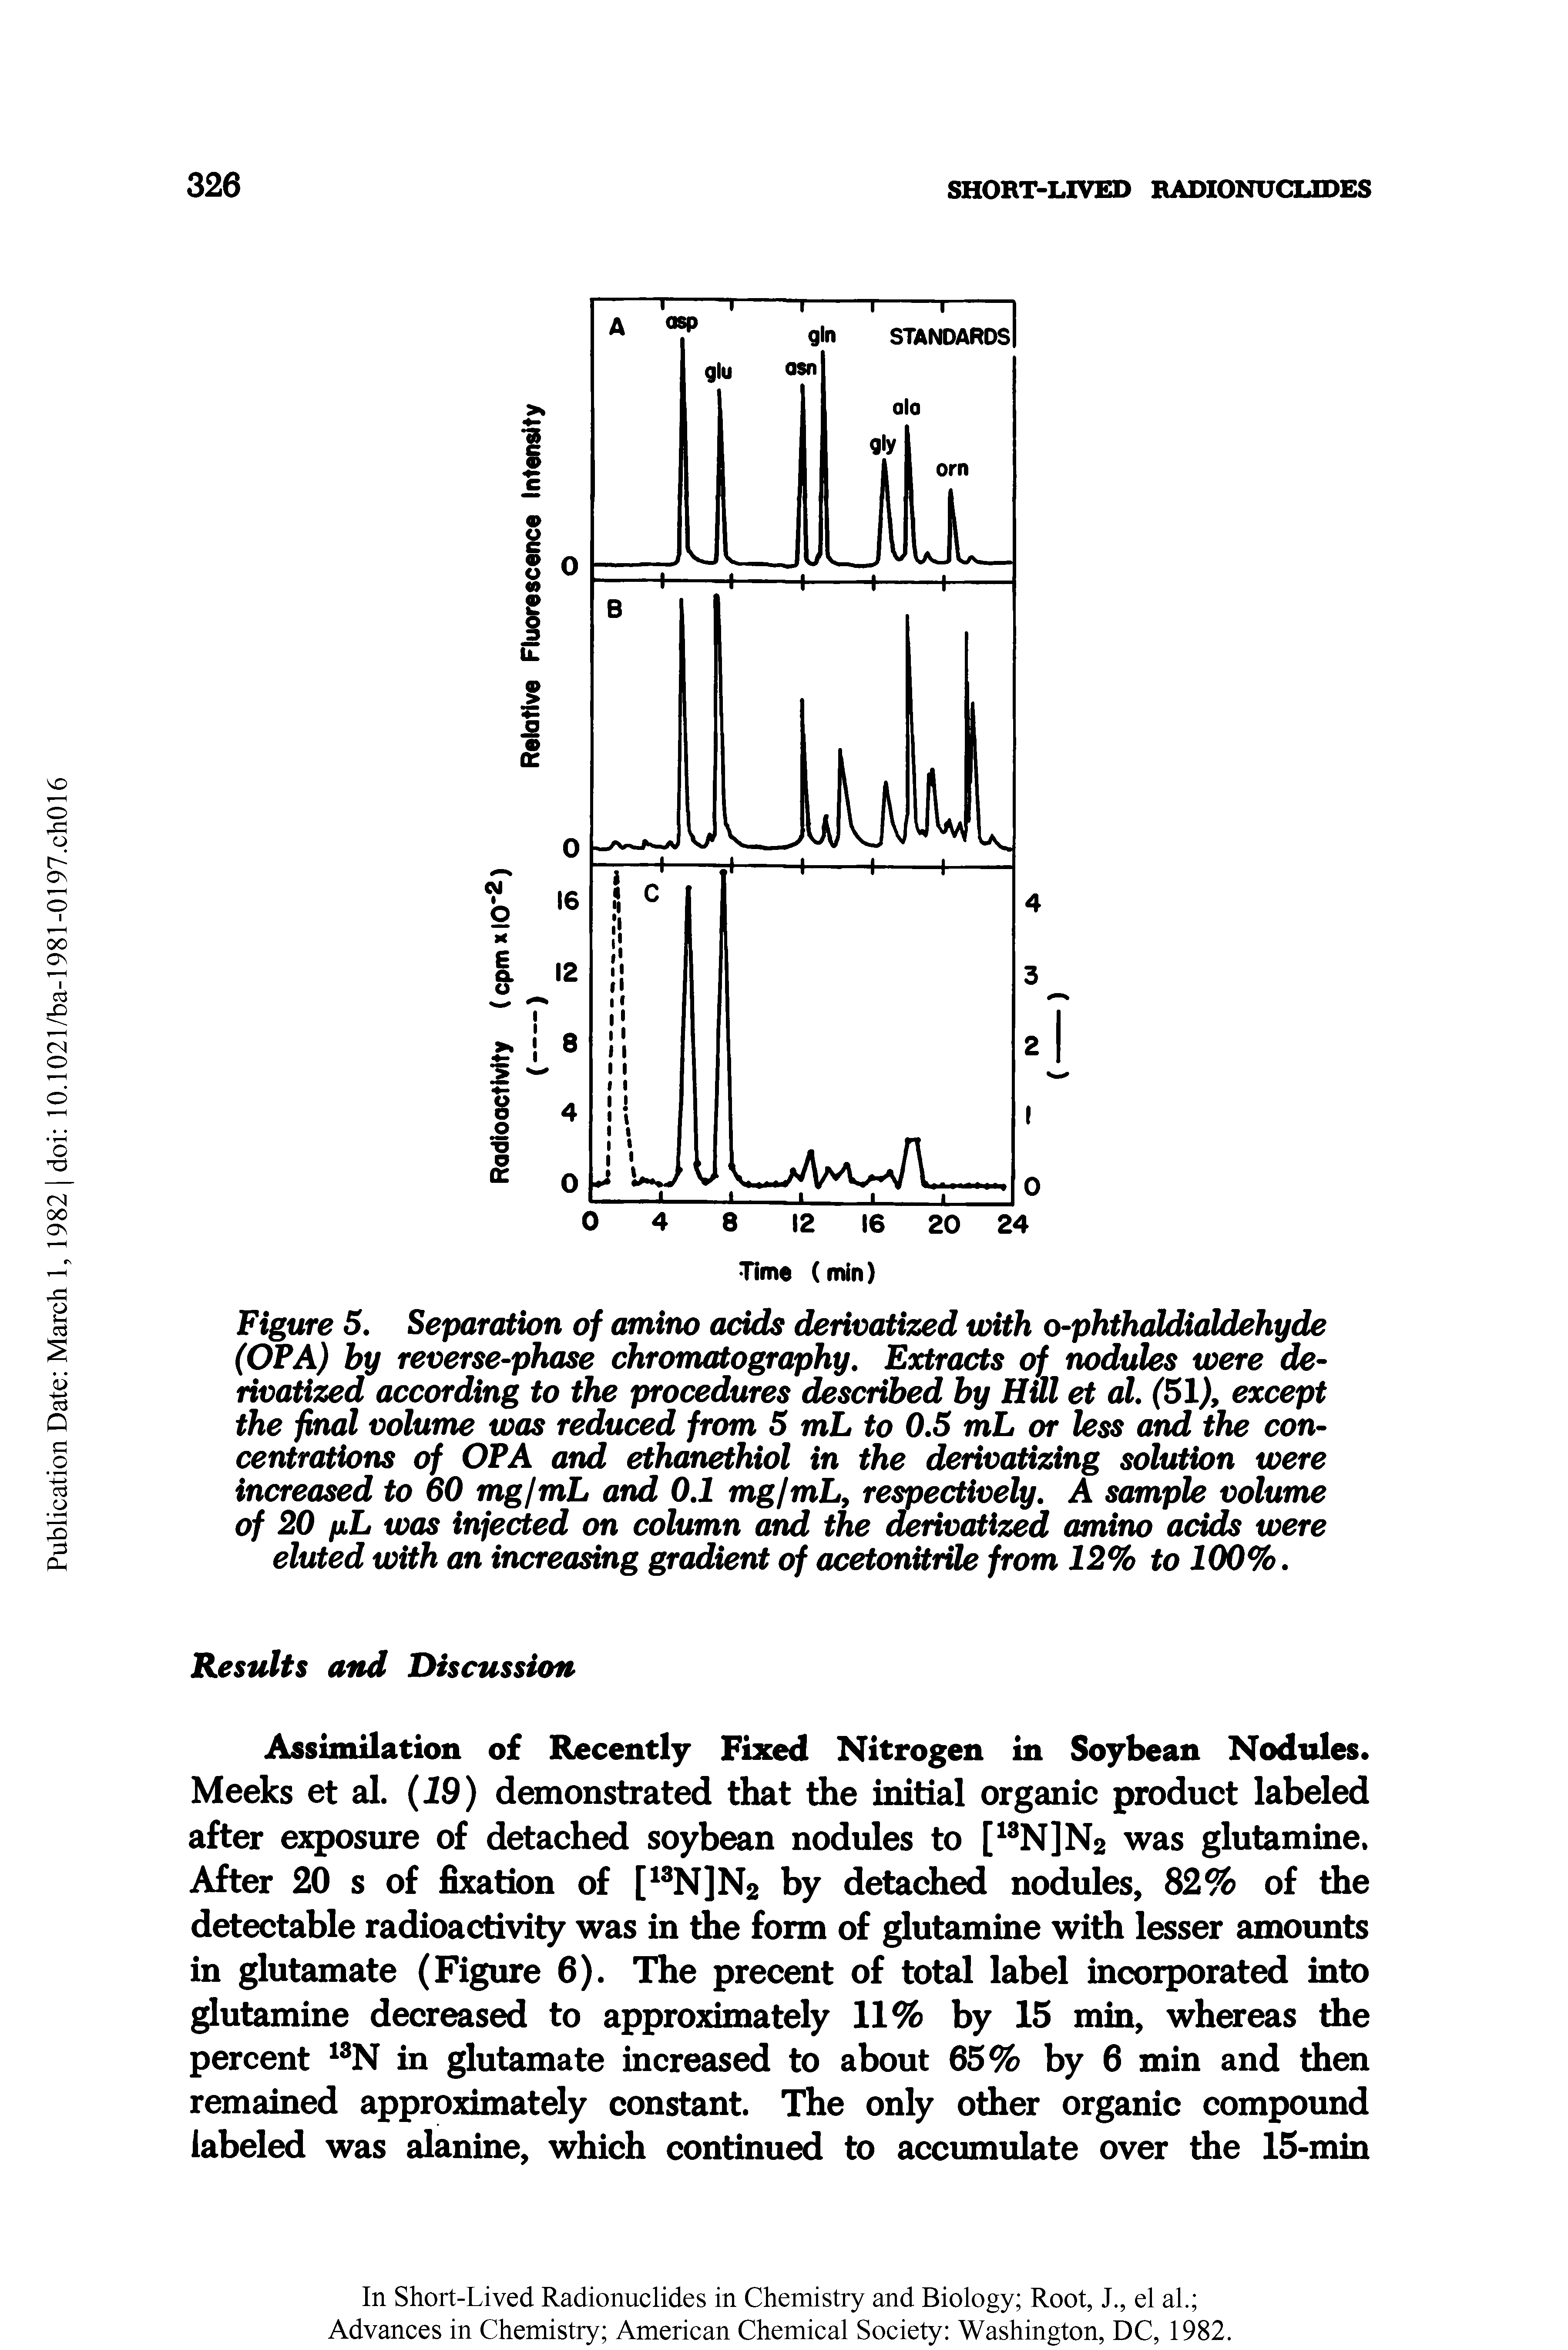 Figure 5. Separation of amino acids derivatized with o-phthaldialdehyde (OTA) by reverse-phase chromatography. Extracts of nodules were derivatized according to the procedures described by Hill et al, (51, except the final volume was reduced from 5 mL to 0.5 mL or less and the concentrations of OTA and ethanethiol in the derivaUzing solution were increased to 60 mgjmL and 0.1 mglmLy respectively. A sample volume of 20 fiL was injected on column and the derivatized amino acids were eluted with an increasing gradient of acetonitrile from 12% to 100%.